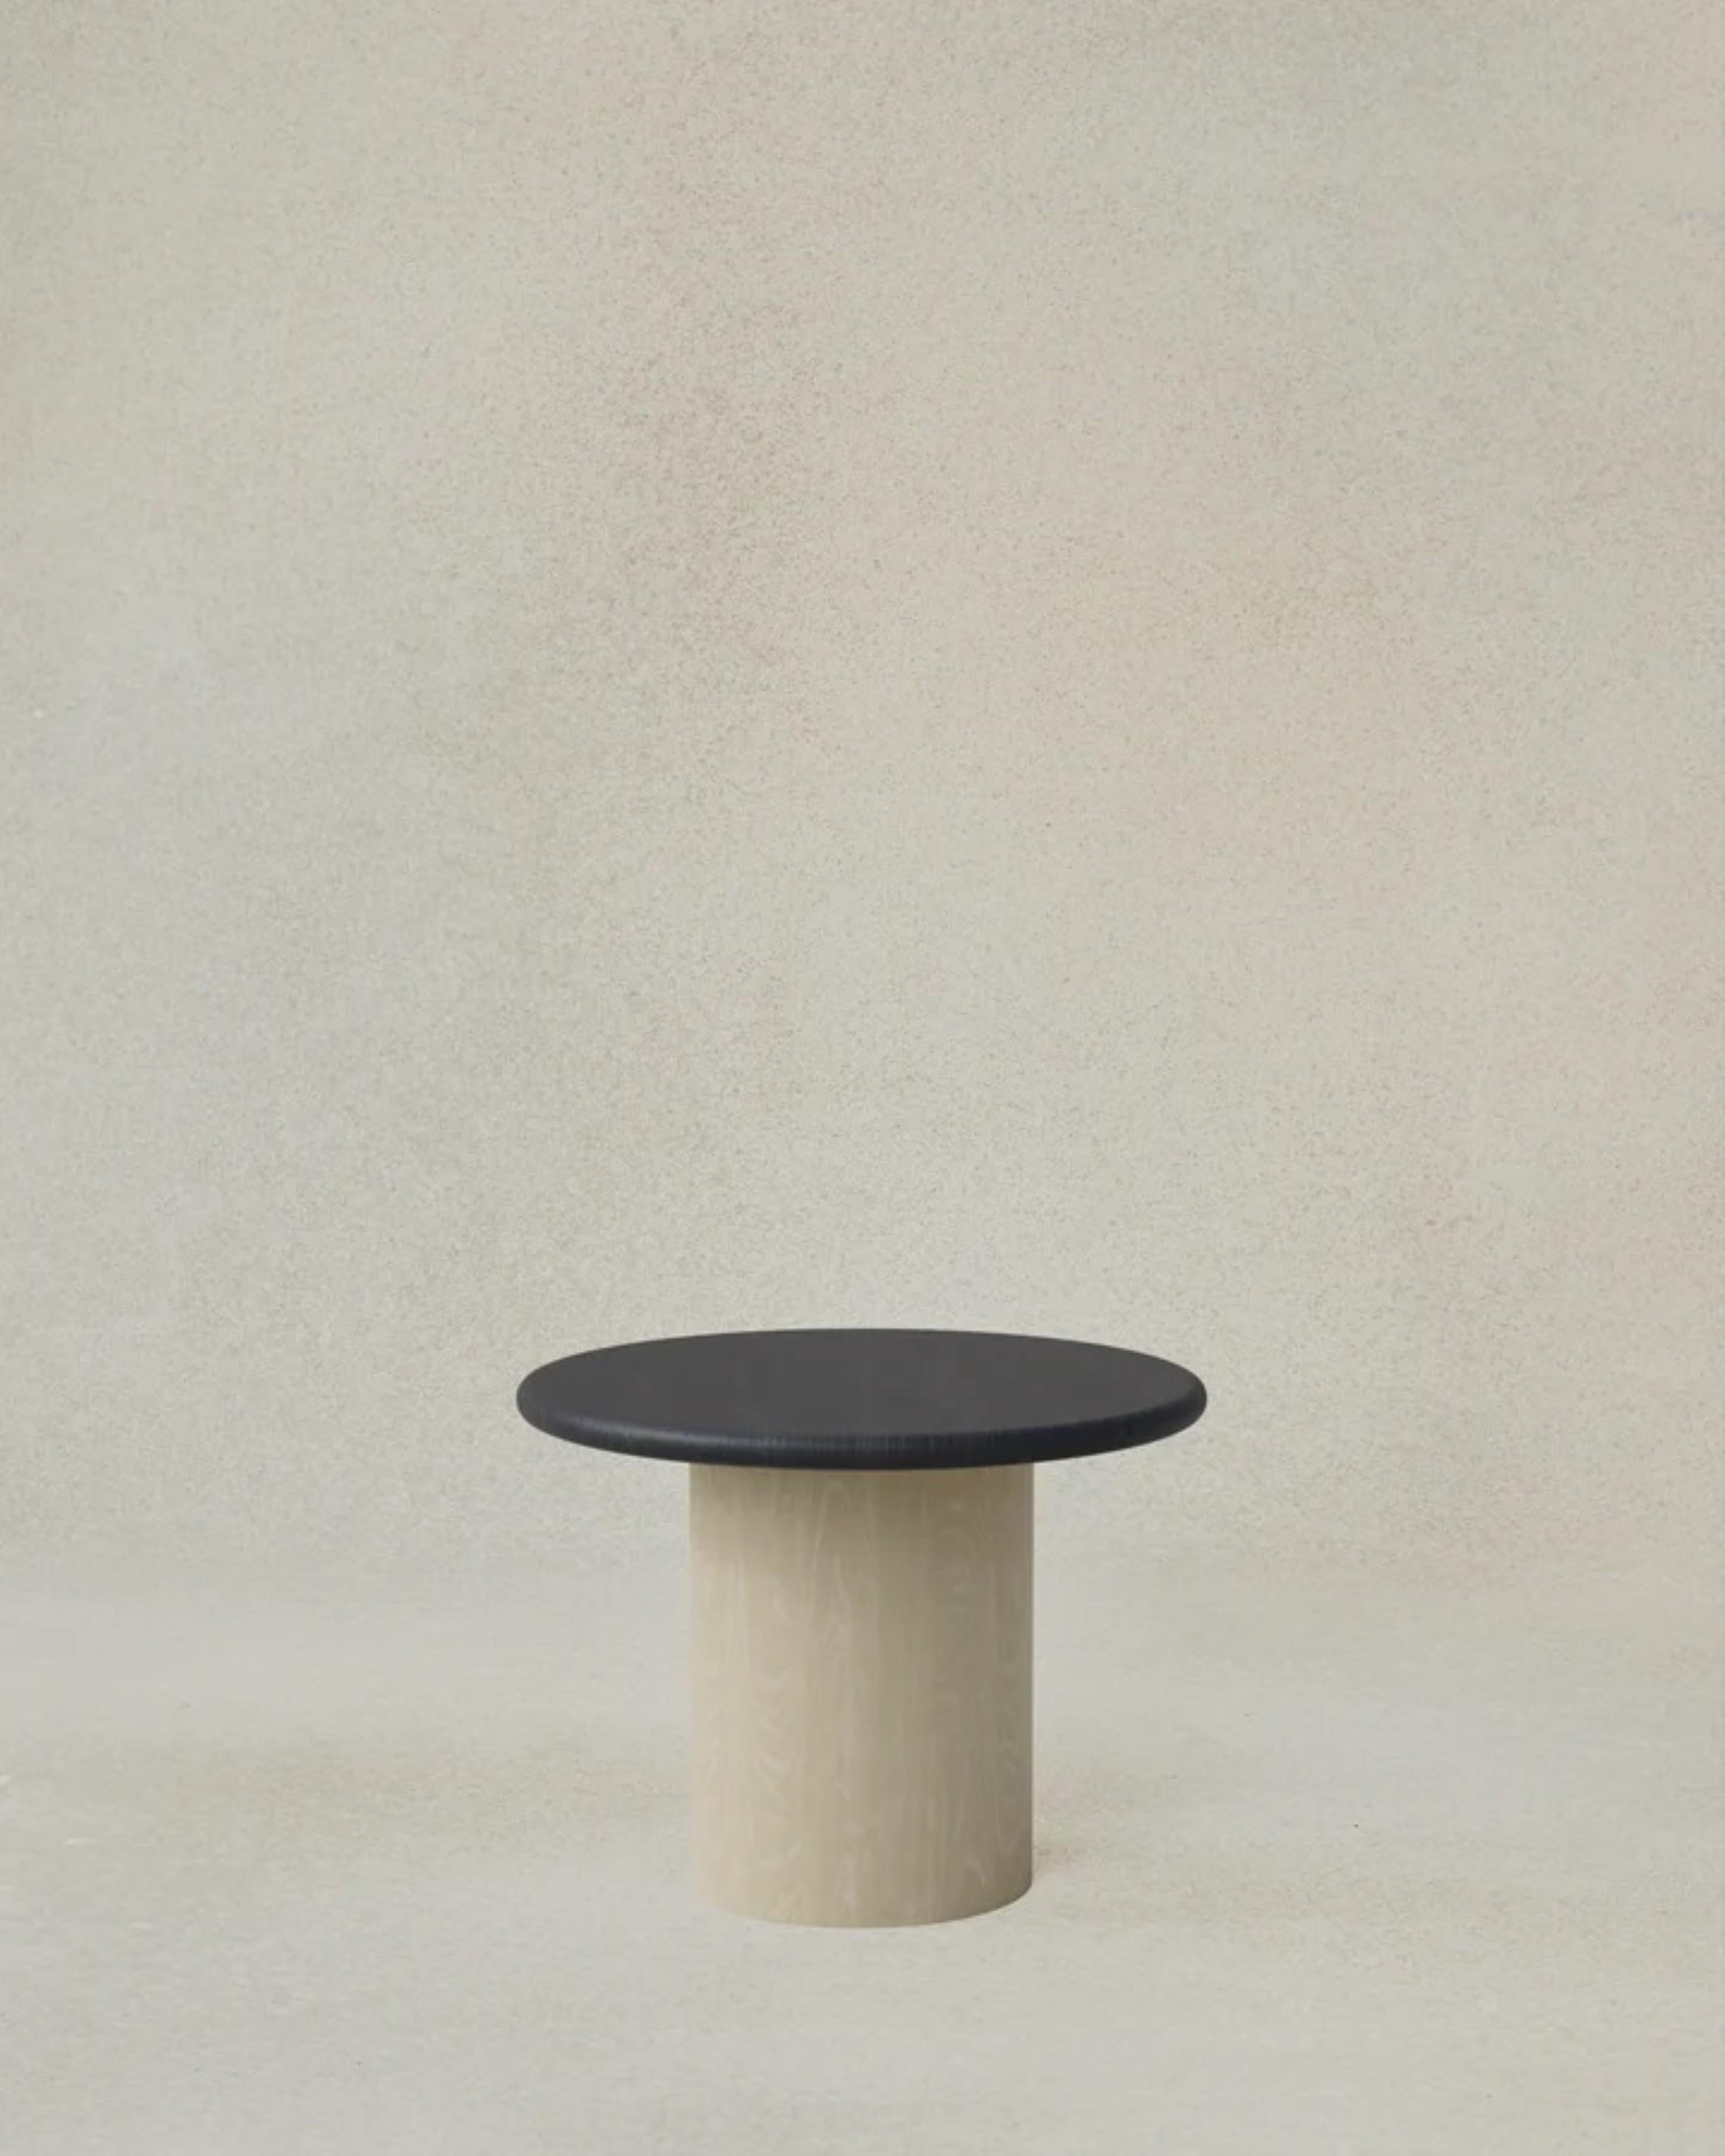 The raindrop 500 is the largest side table we offer in the series can be paired with a 300 or 1000, or both! Now available in a range of finishes to suit any interior or style. The raindrops nestle together to form a cascading series of tables in